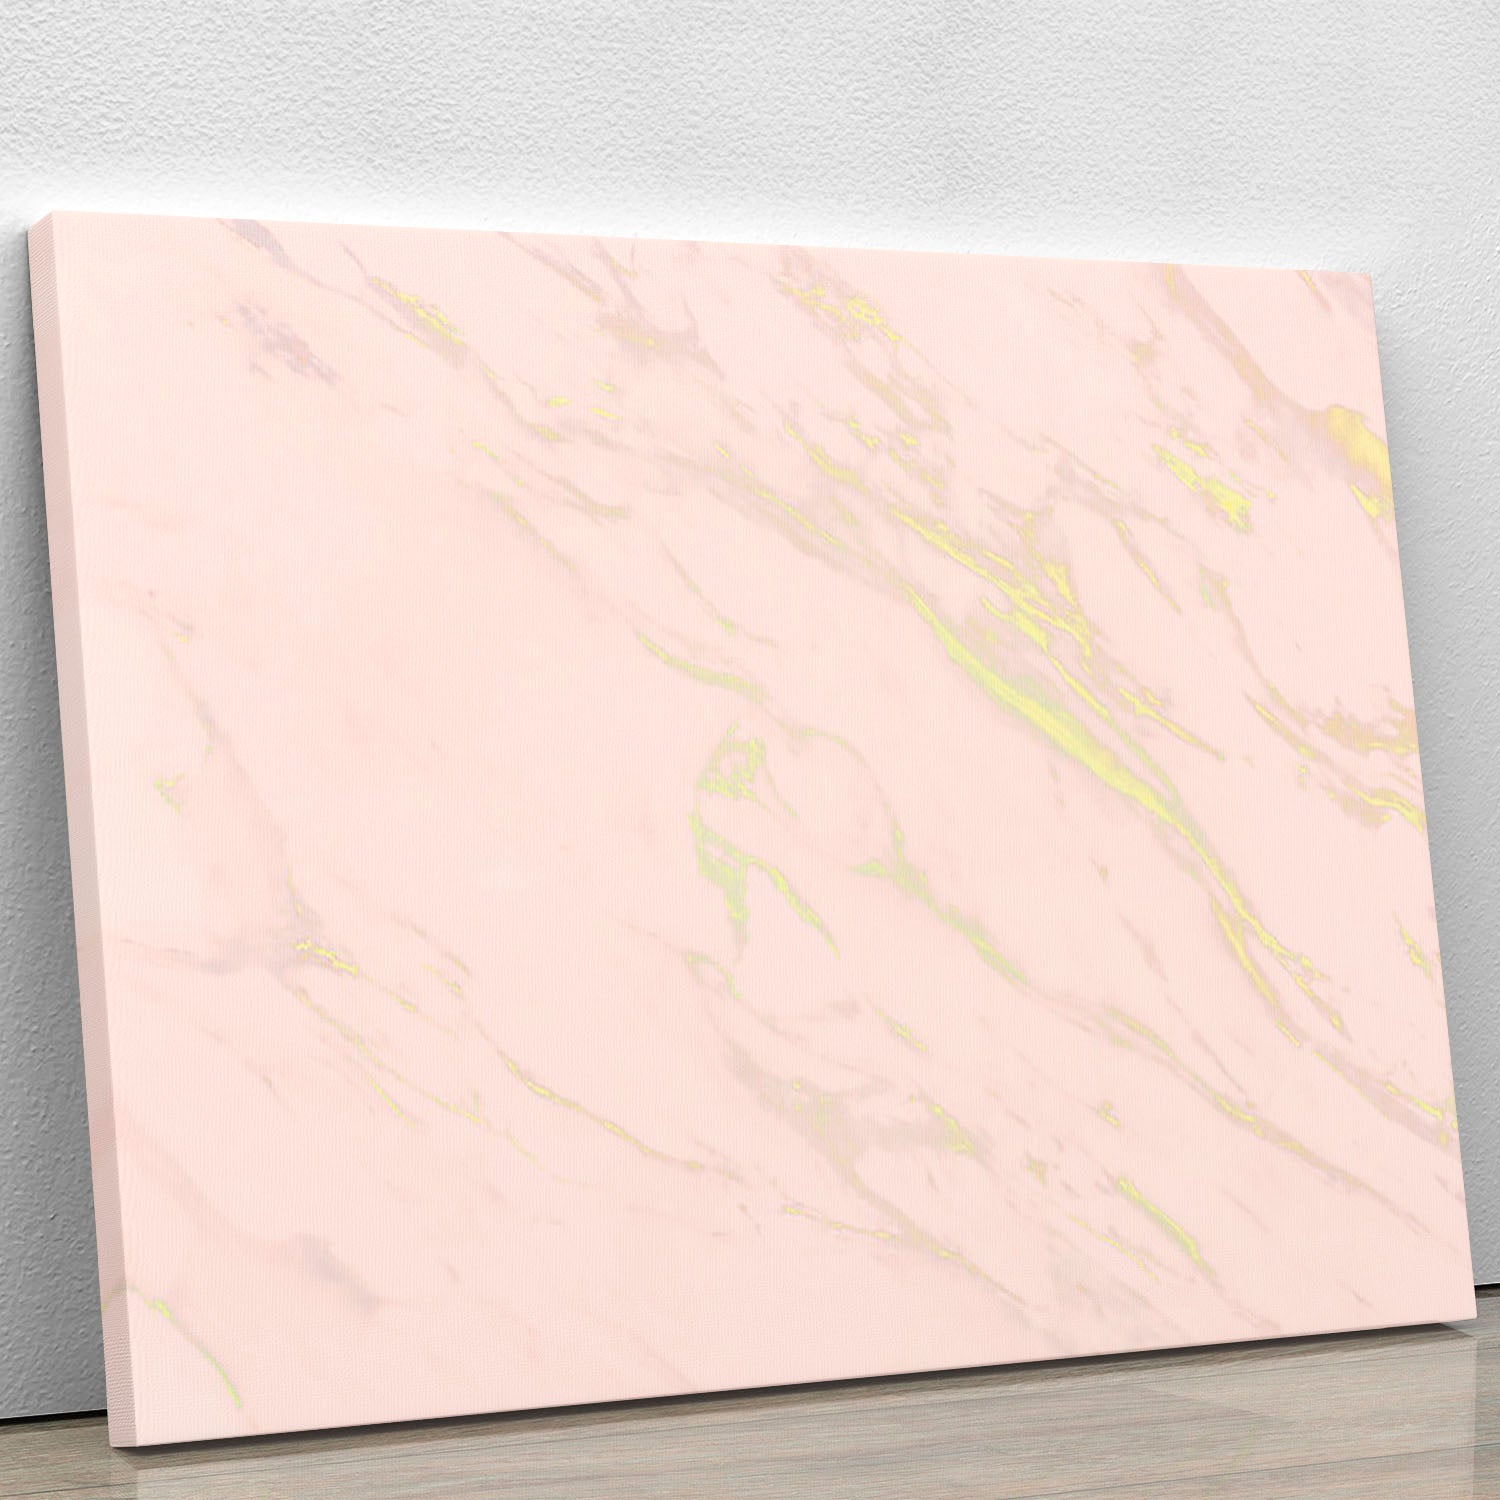 Baby Pink Marble with Gold Veins Canvas Print or Poster - Canvas Art Rocks - 1